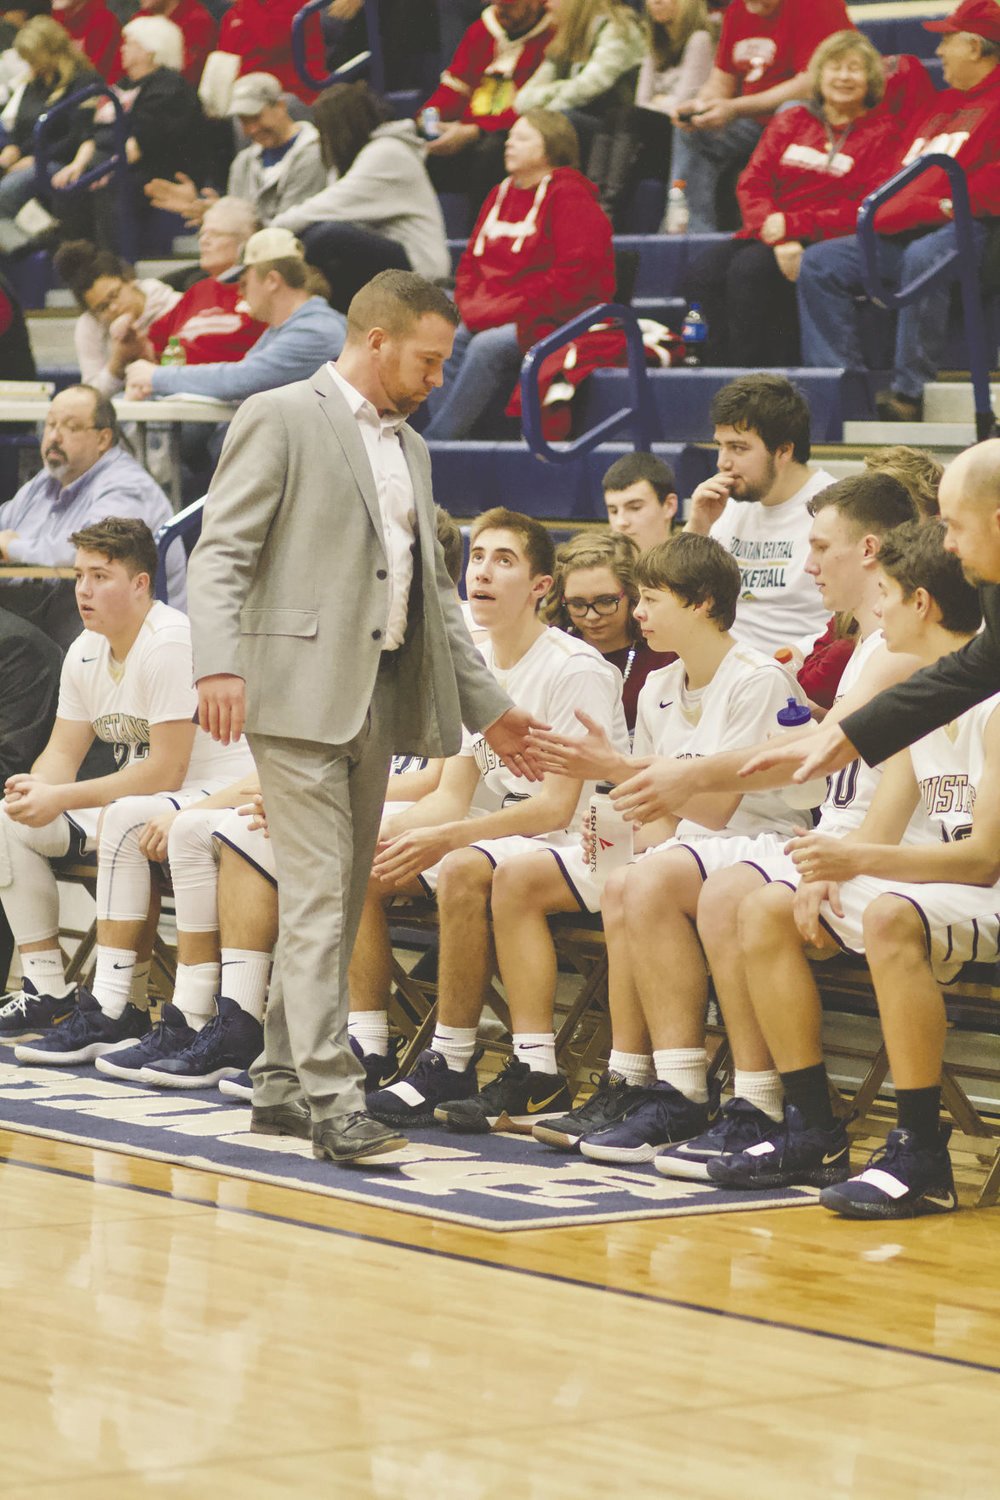 Fountain Central boys basketball coach Phil Shabi resigned this spring to assume the role of assistant principal.